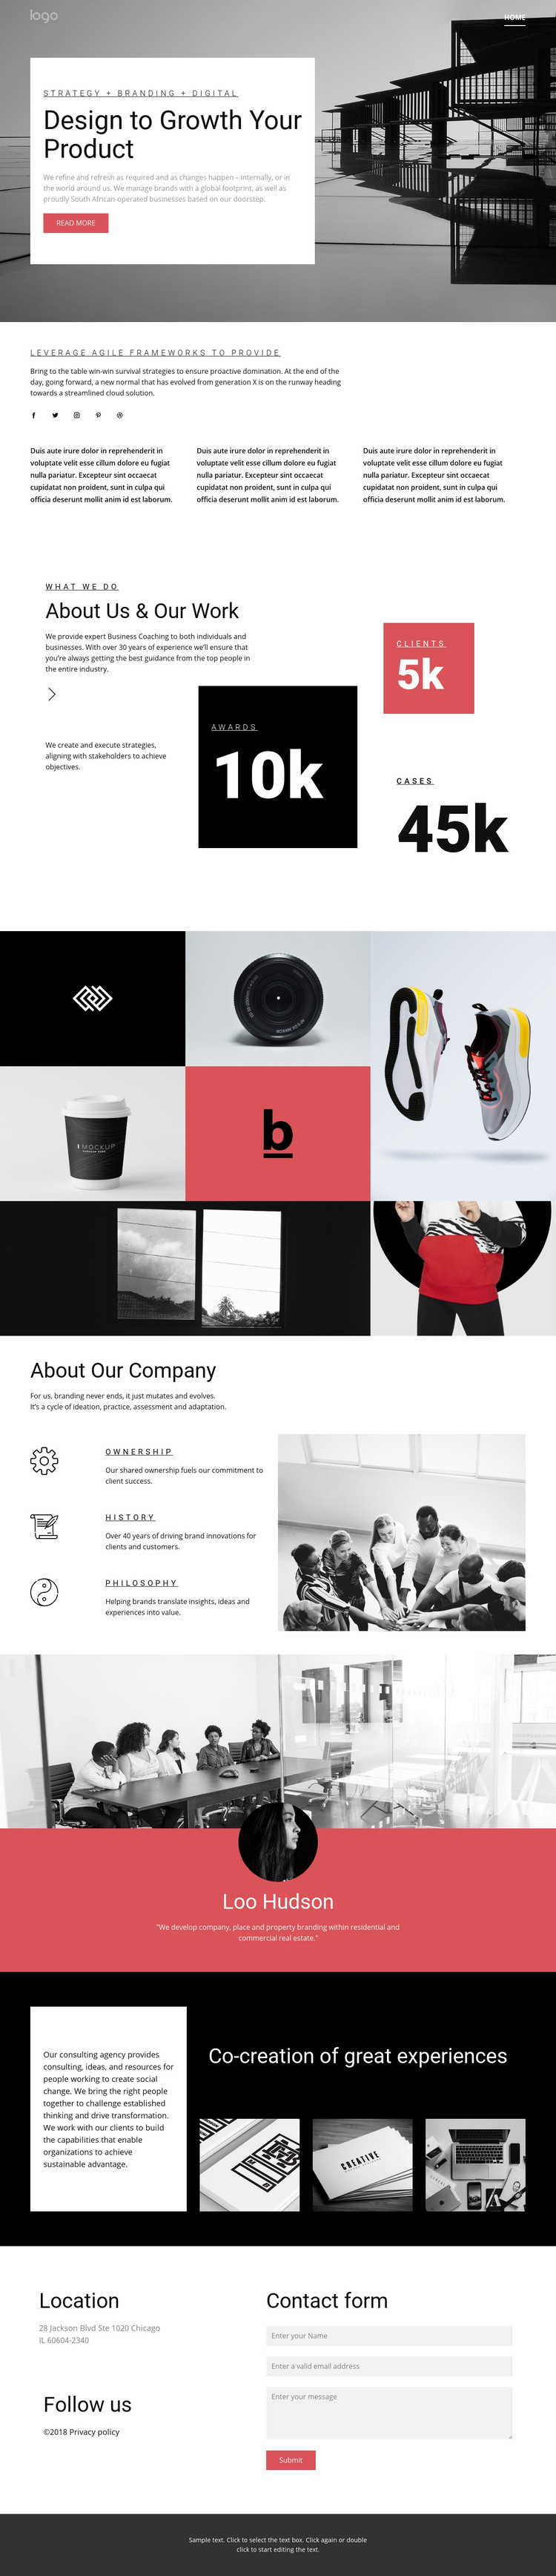 Business growth agency Homepage Design